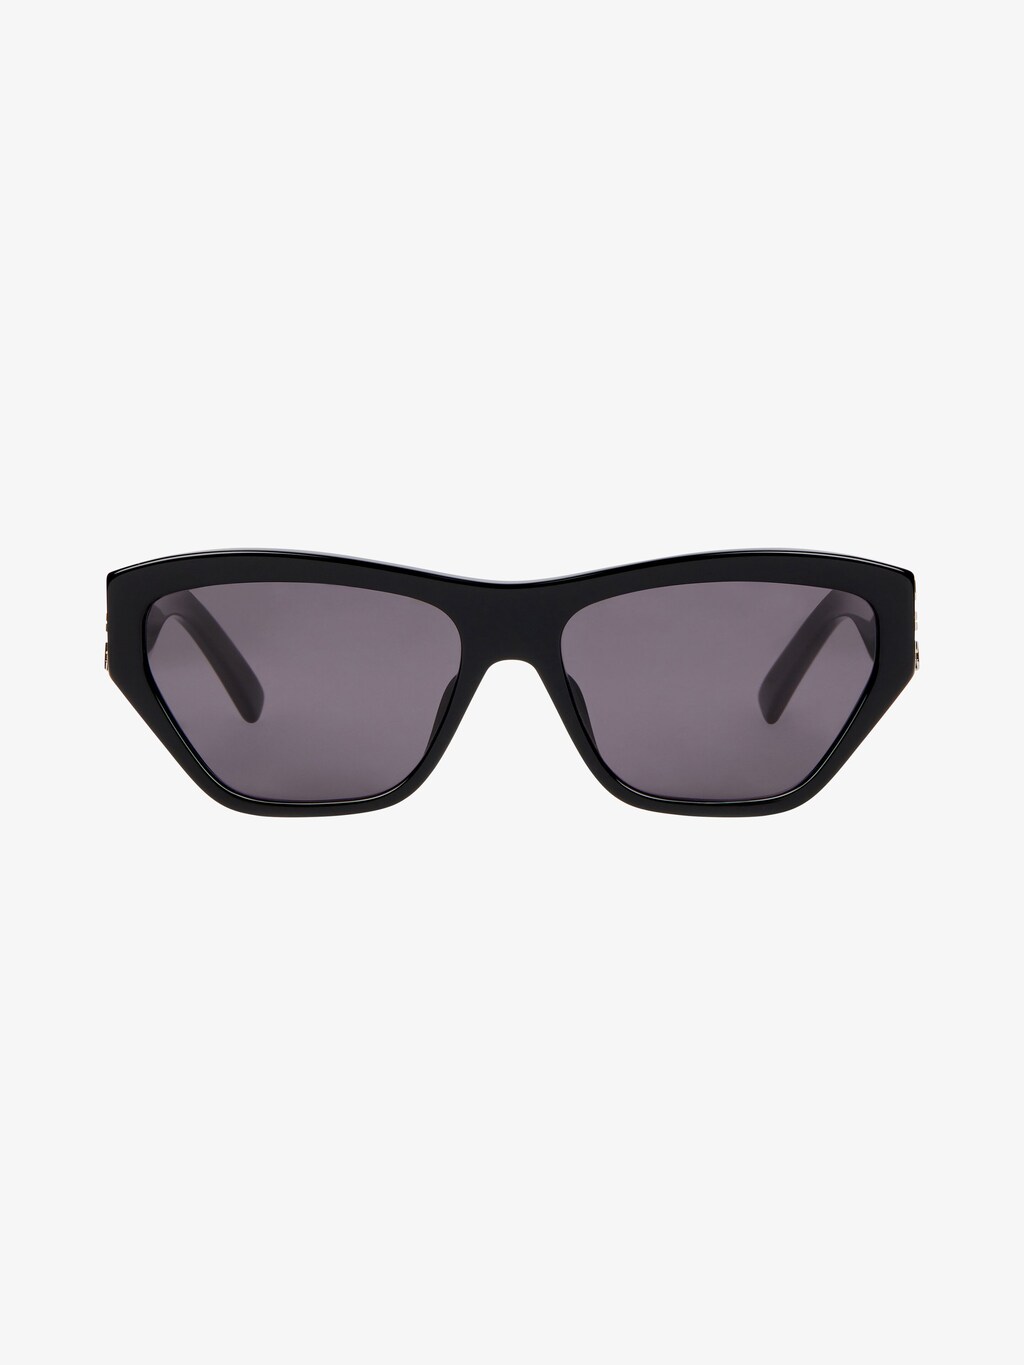 Luxury Sunglasses Collection for Women | Givenchy US